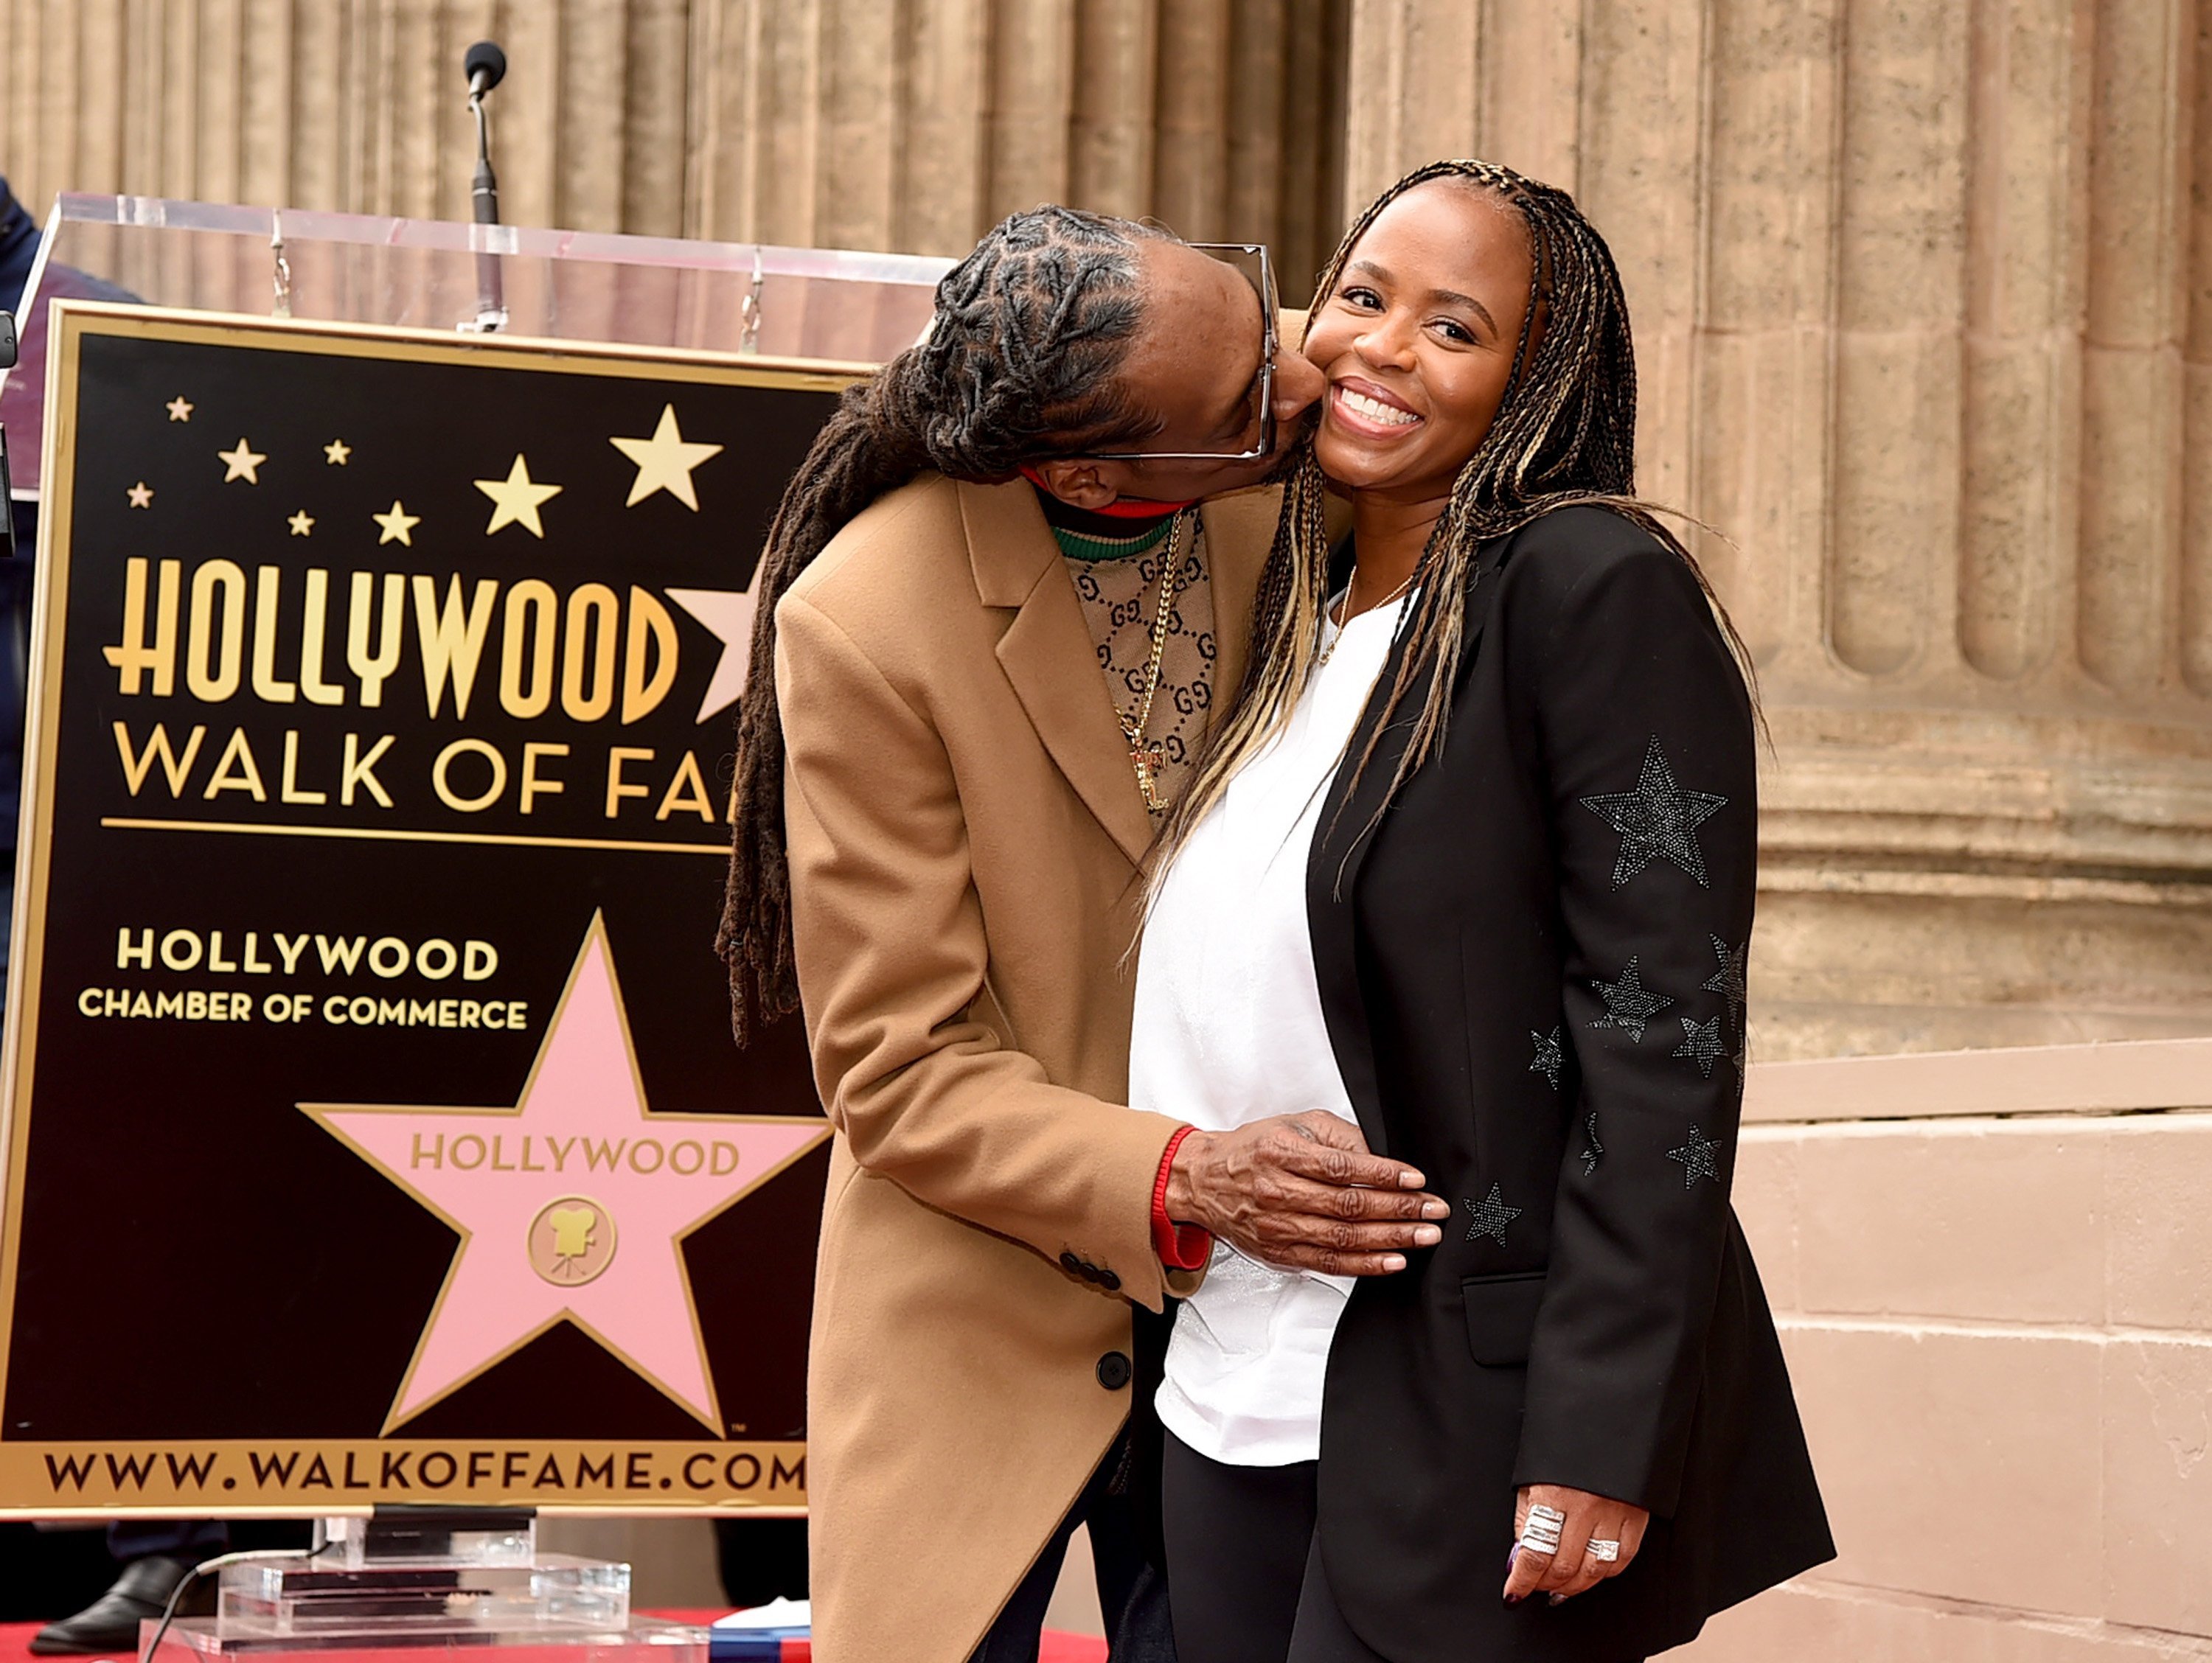 Snoop Dogg and Shante Broadus attend a ceremony honoring Snoop Dogg With Star On The Hollywood Walk Of Fame on November 19, 2018 l Source: Getty Images